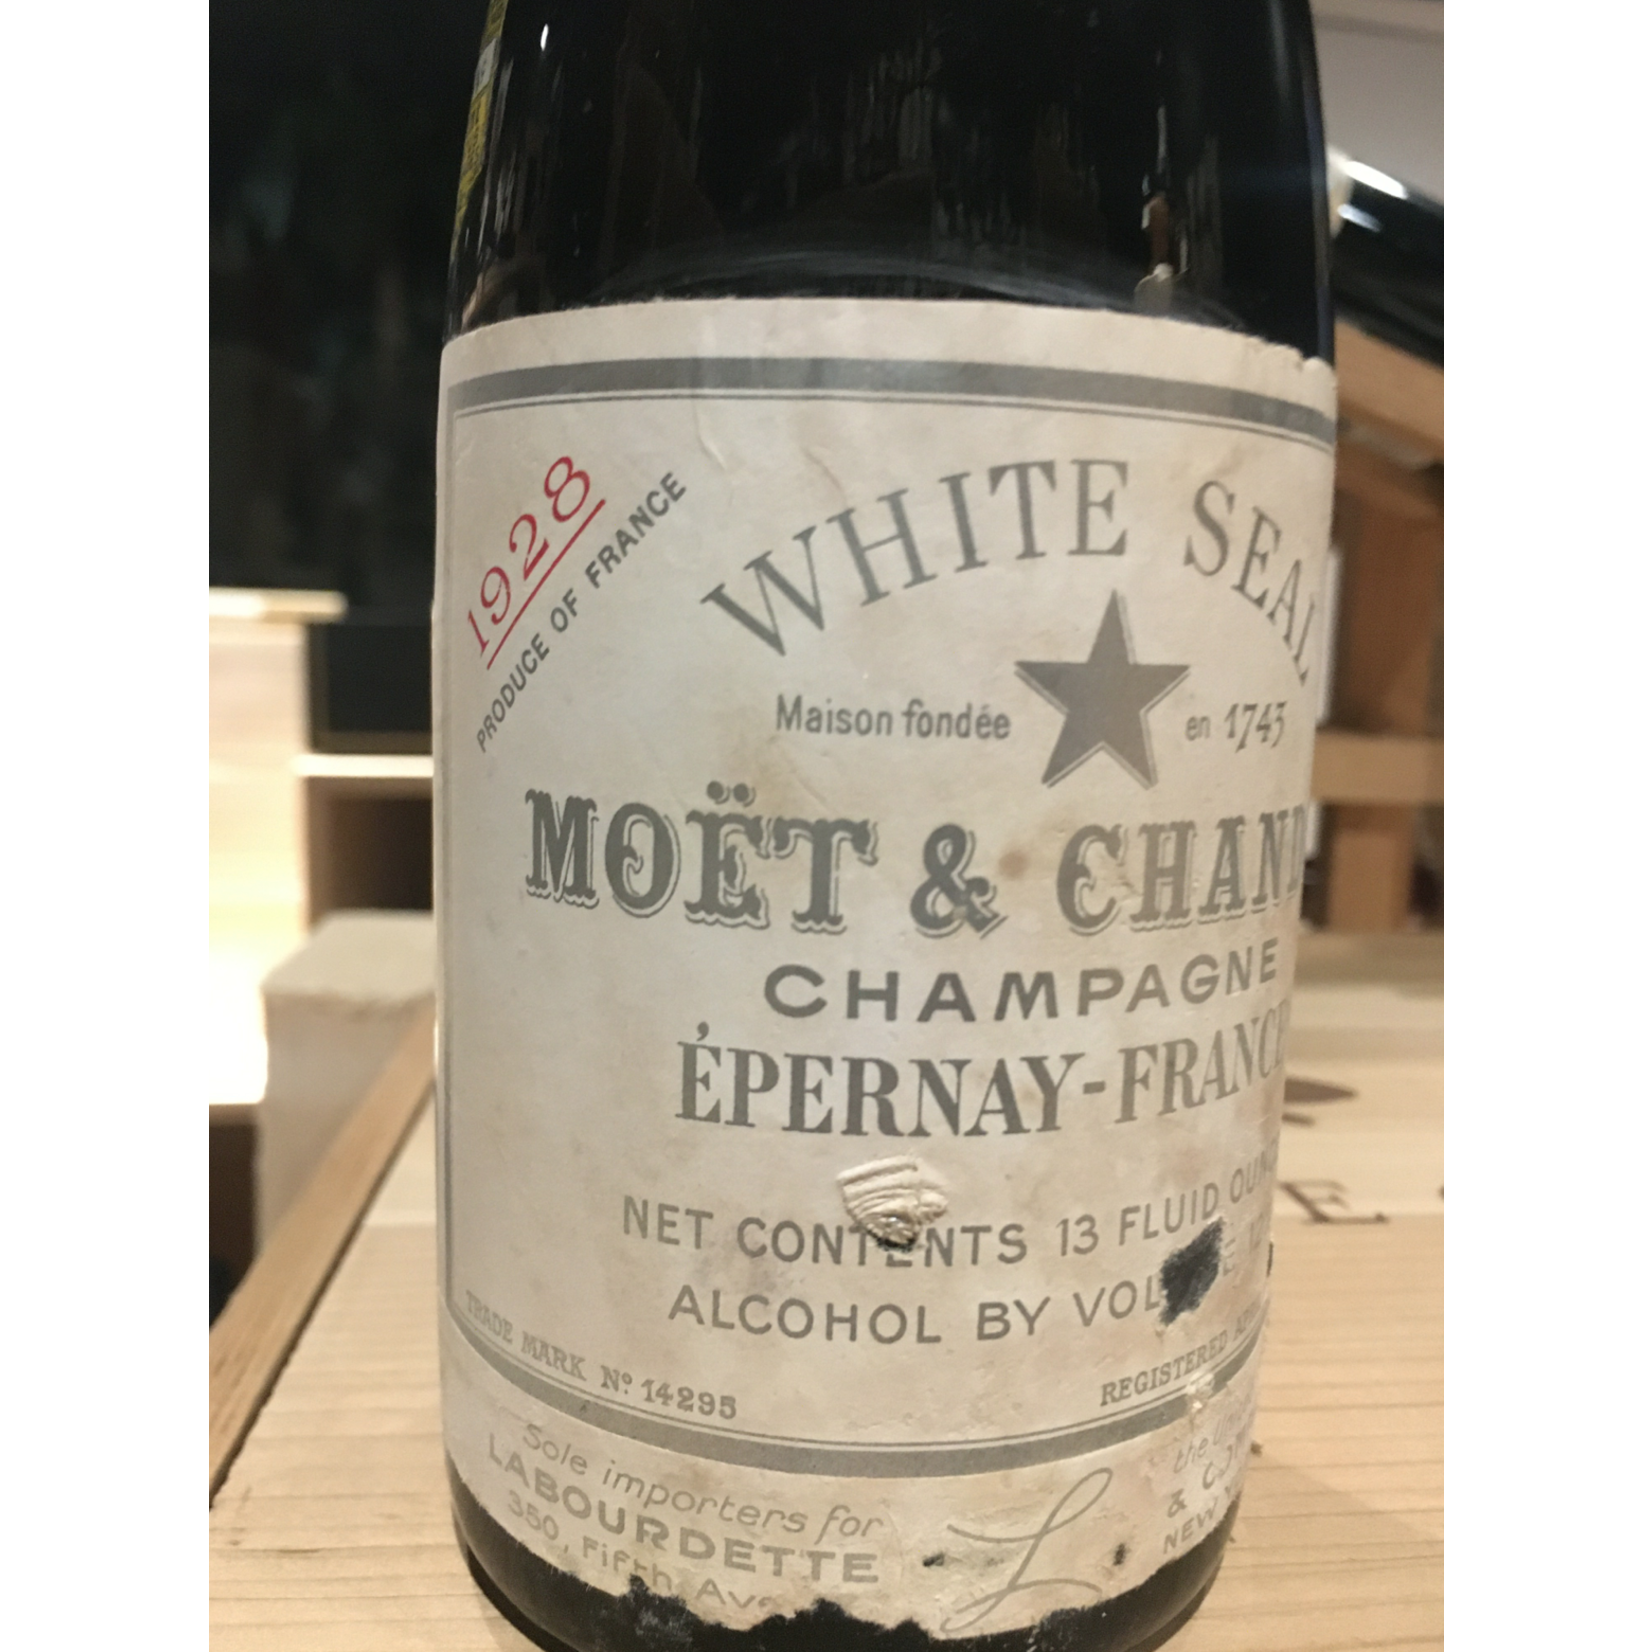 1928, Moet & Chandon White Seal Very Dry 13 Fluid Ounces, Champagne, Epernay, Champagne, France, 12% Alc, CTnr